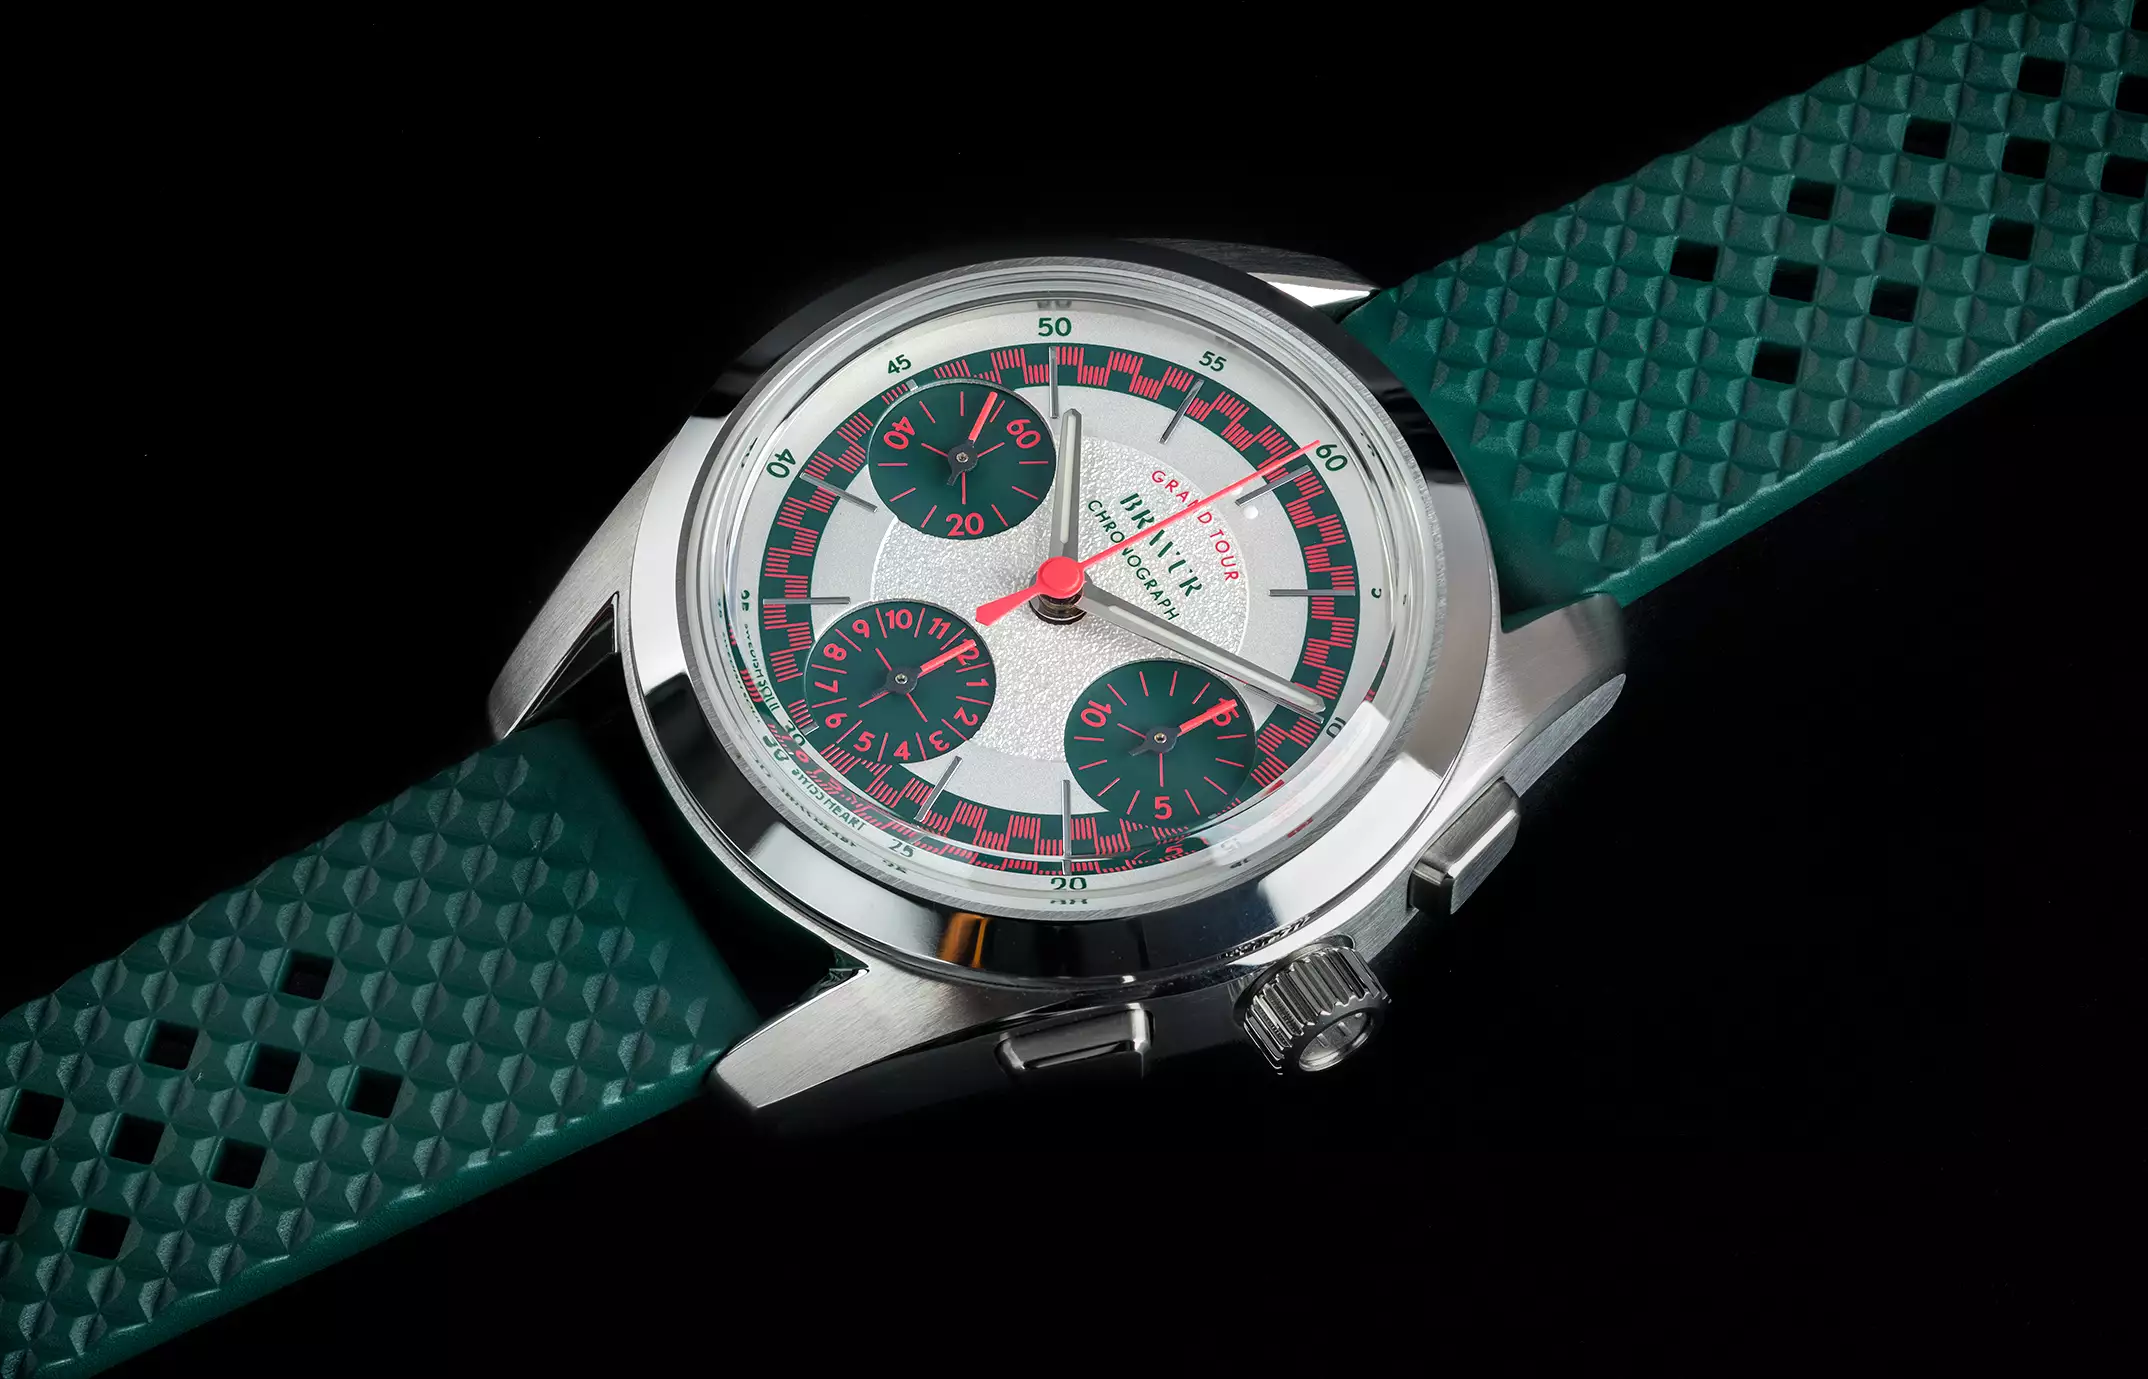 You Can Find This New Chronograph From Bravur Watches? On The Wrists Of A Pro Cycling Team